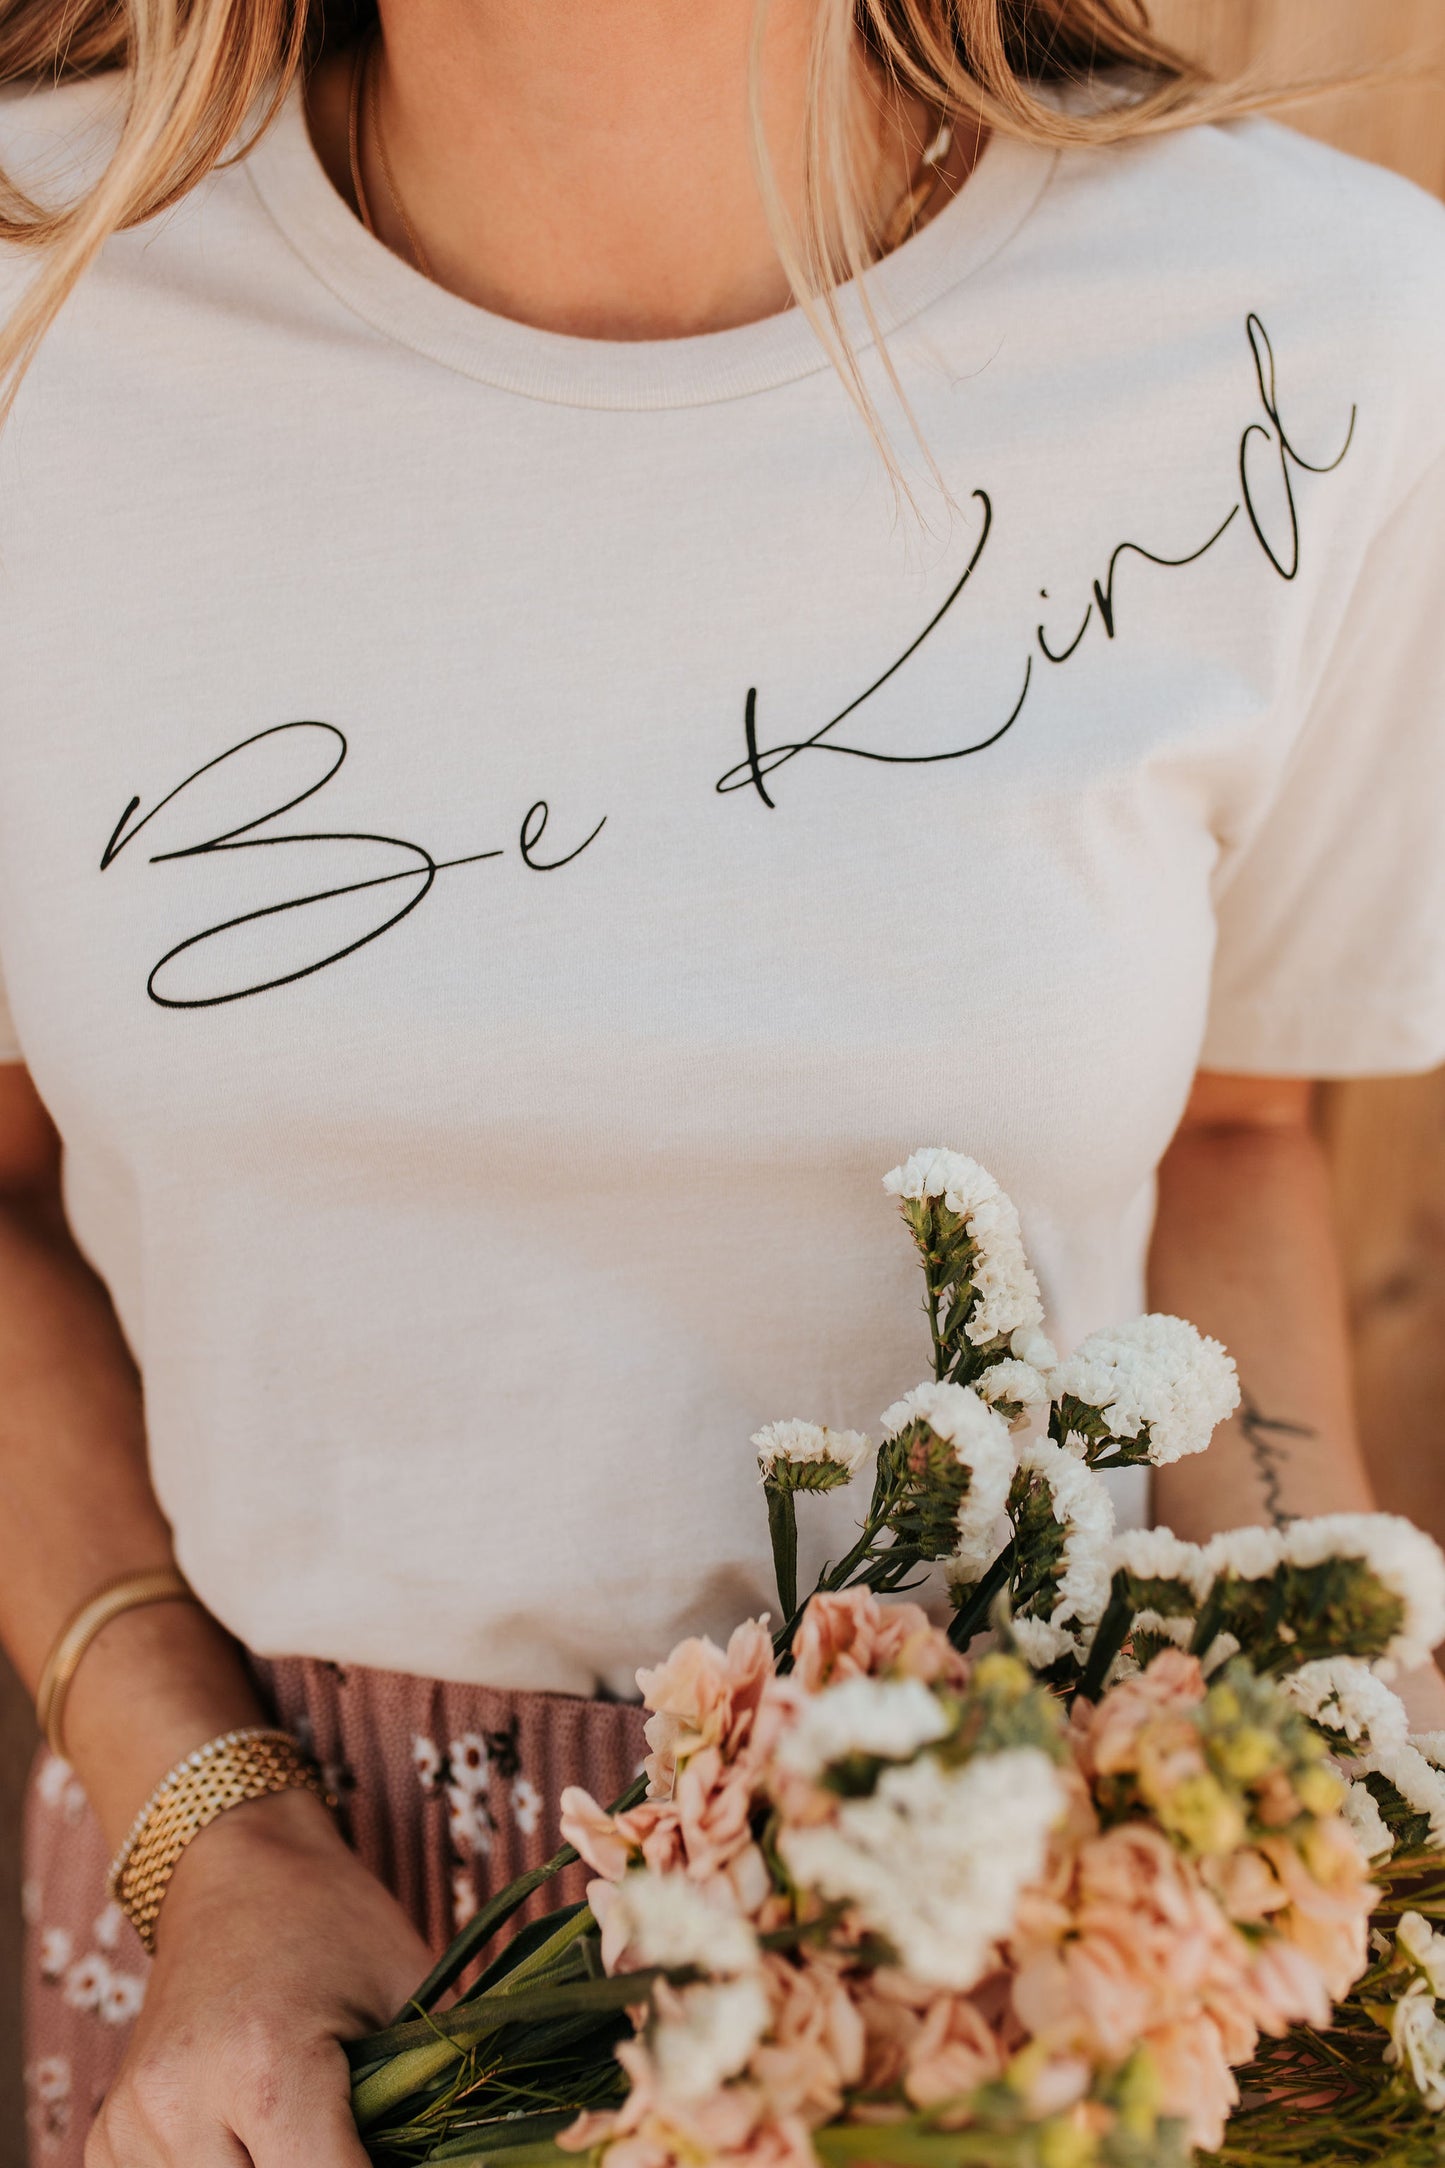 THE BE KIND GRAPHIC TEE IN DUST